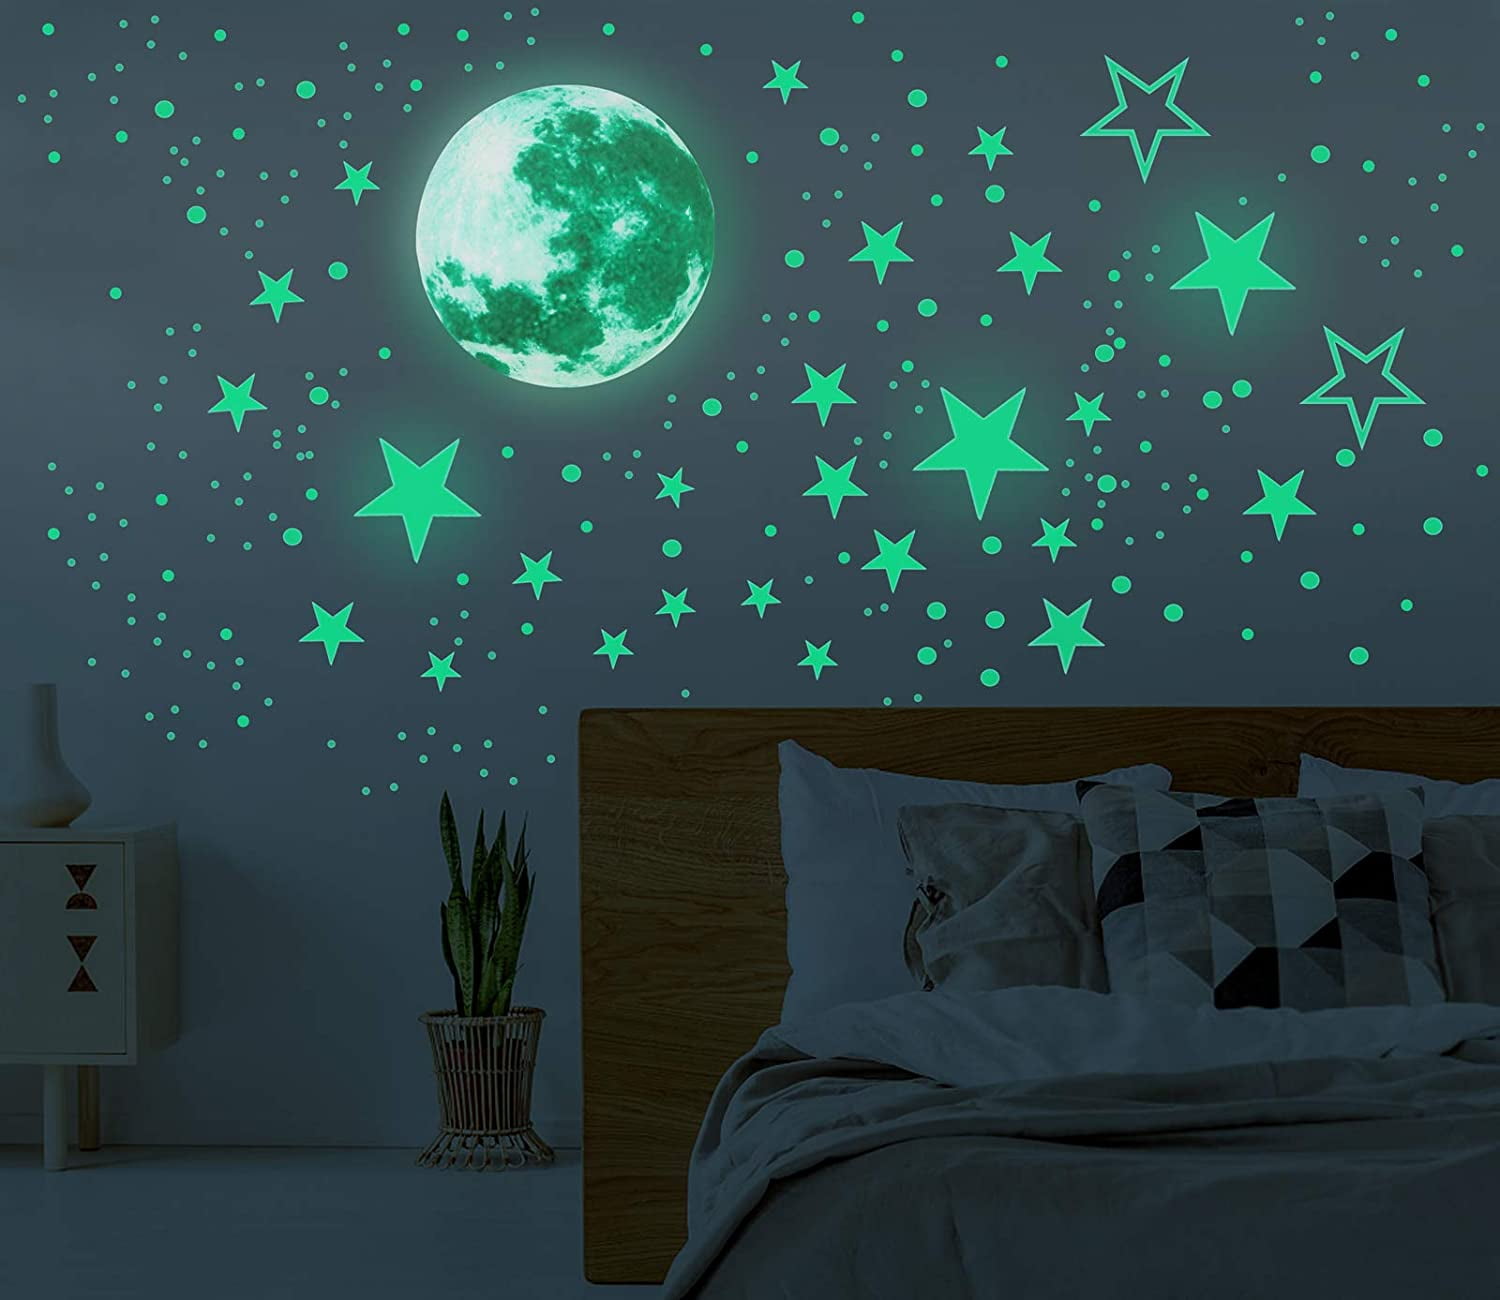 334 Starry Sky Moon and Stars Wall Stickers Favson Luminous Stars Self-Adhesive Wall Sticker Fluorescent Stickers for Bedroom Living Room Children's Room 